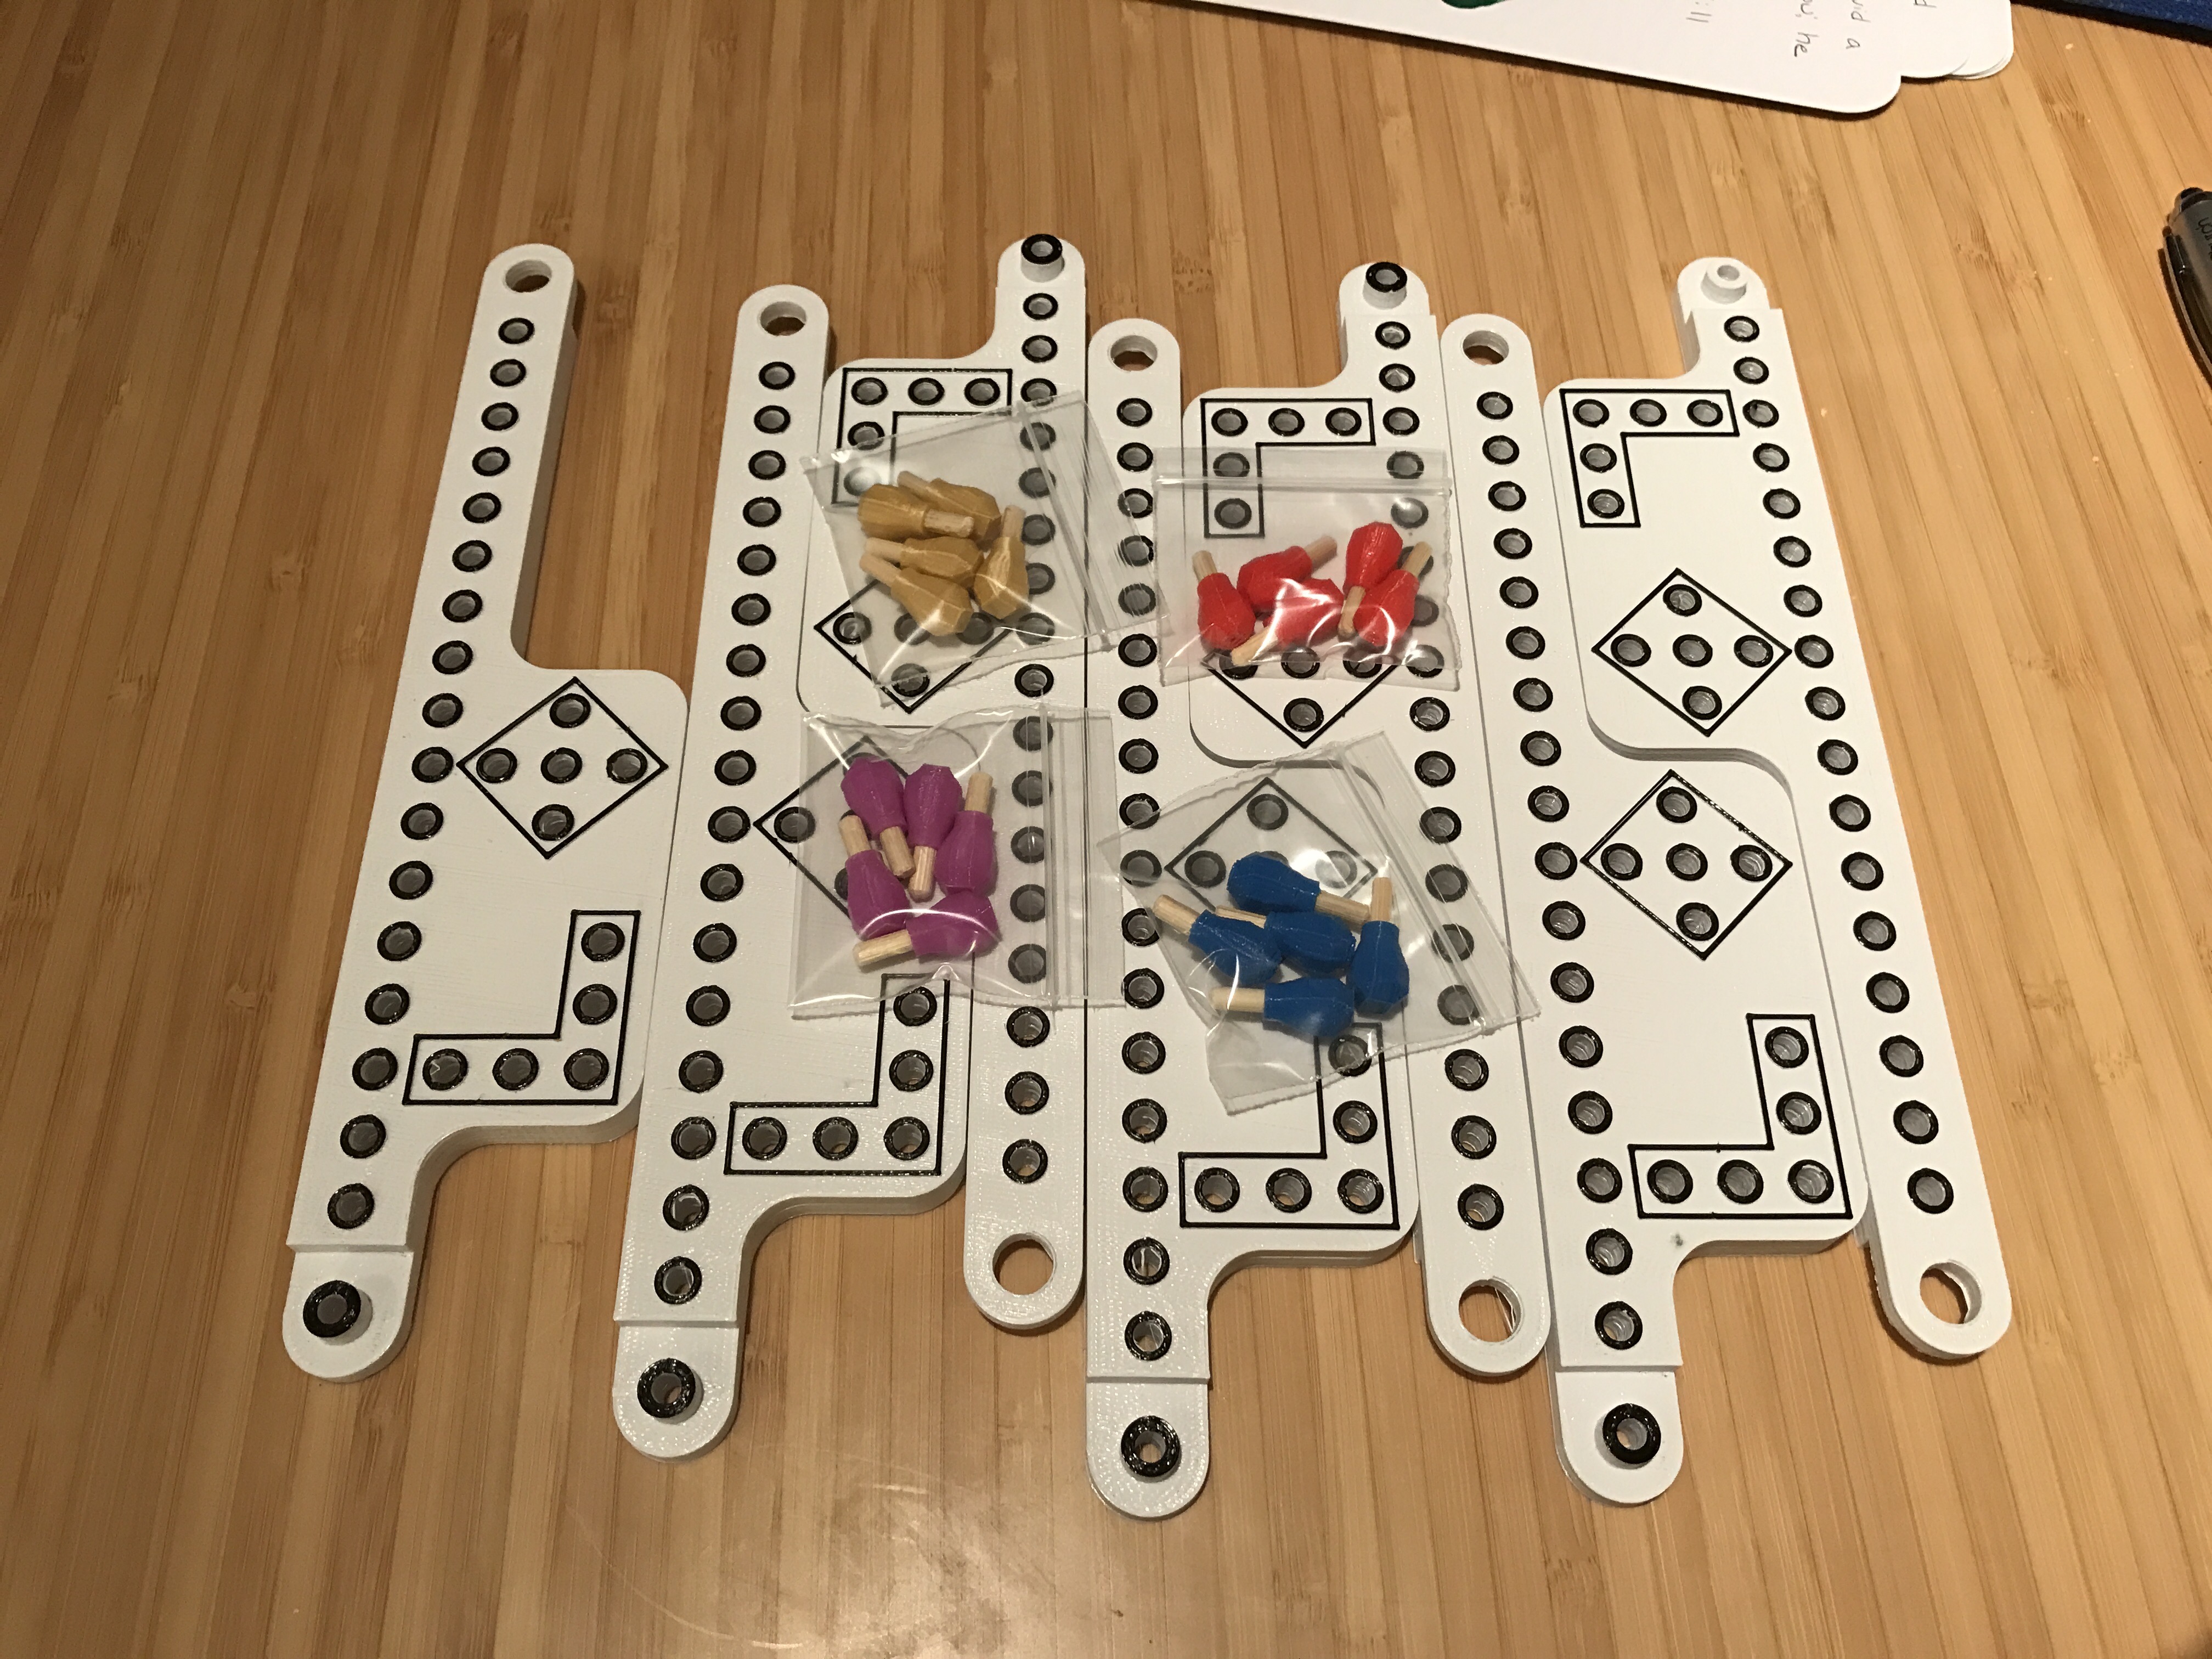 Pegs and Jokers game entirely printed